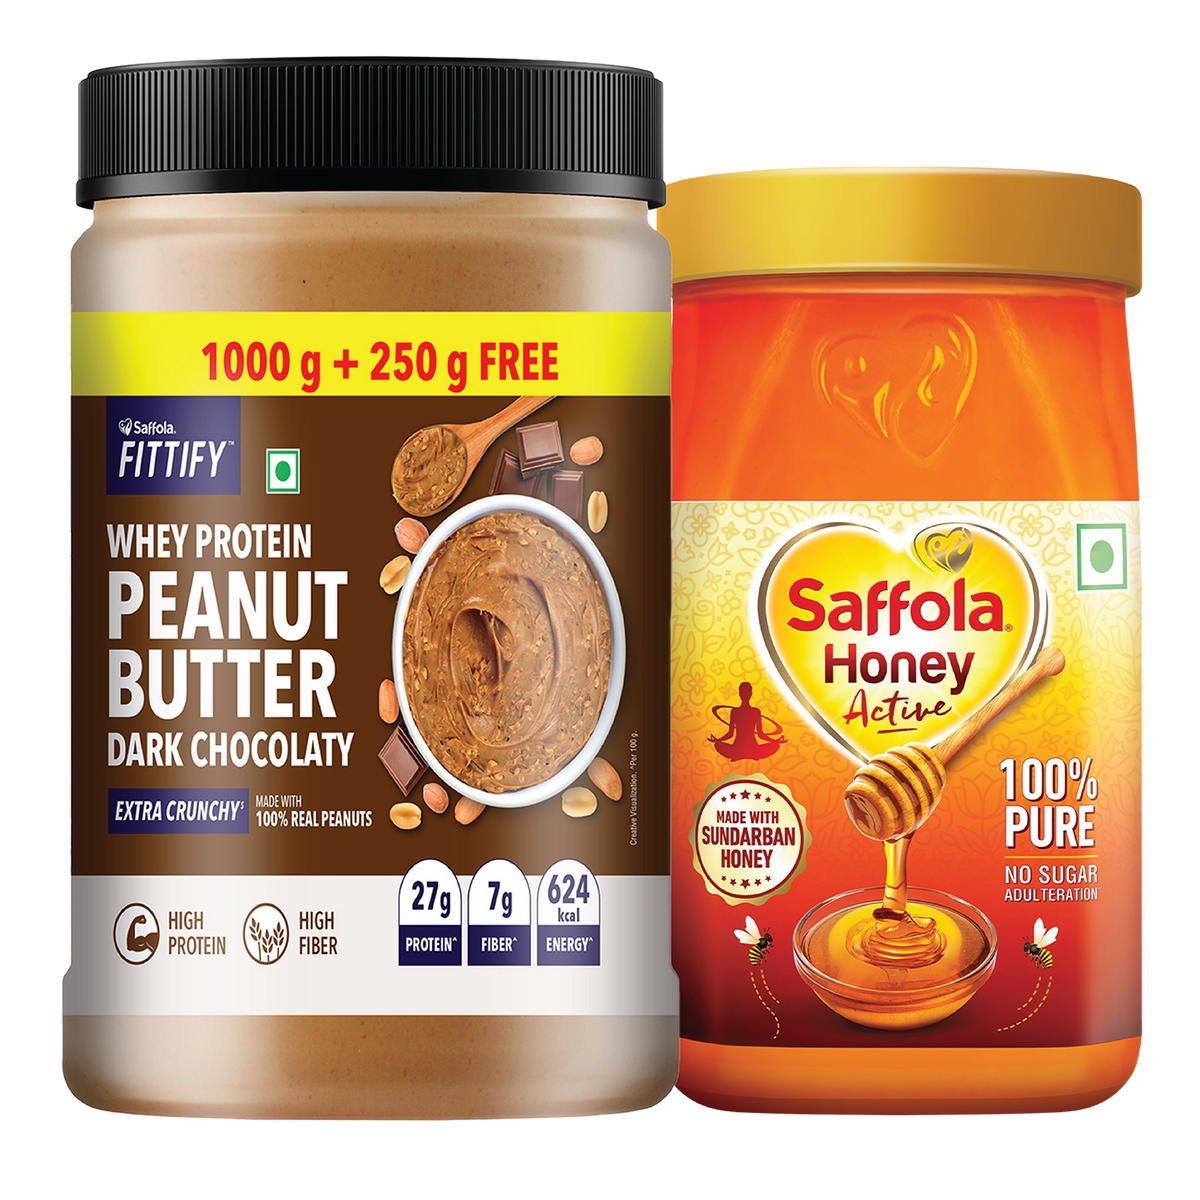 Morning Add-on Combo (Saffola Fittify Whey Protein Peanut Butter Extra Crunchy 1250g + Saffola Honey Active Pet Jar 1kg)